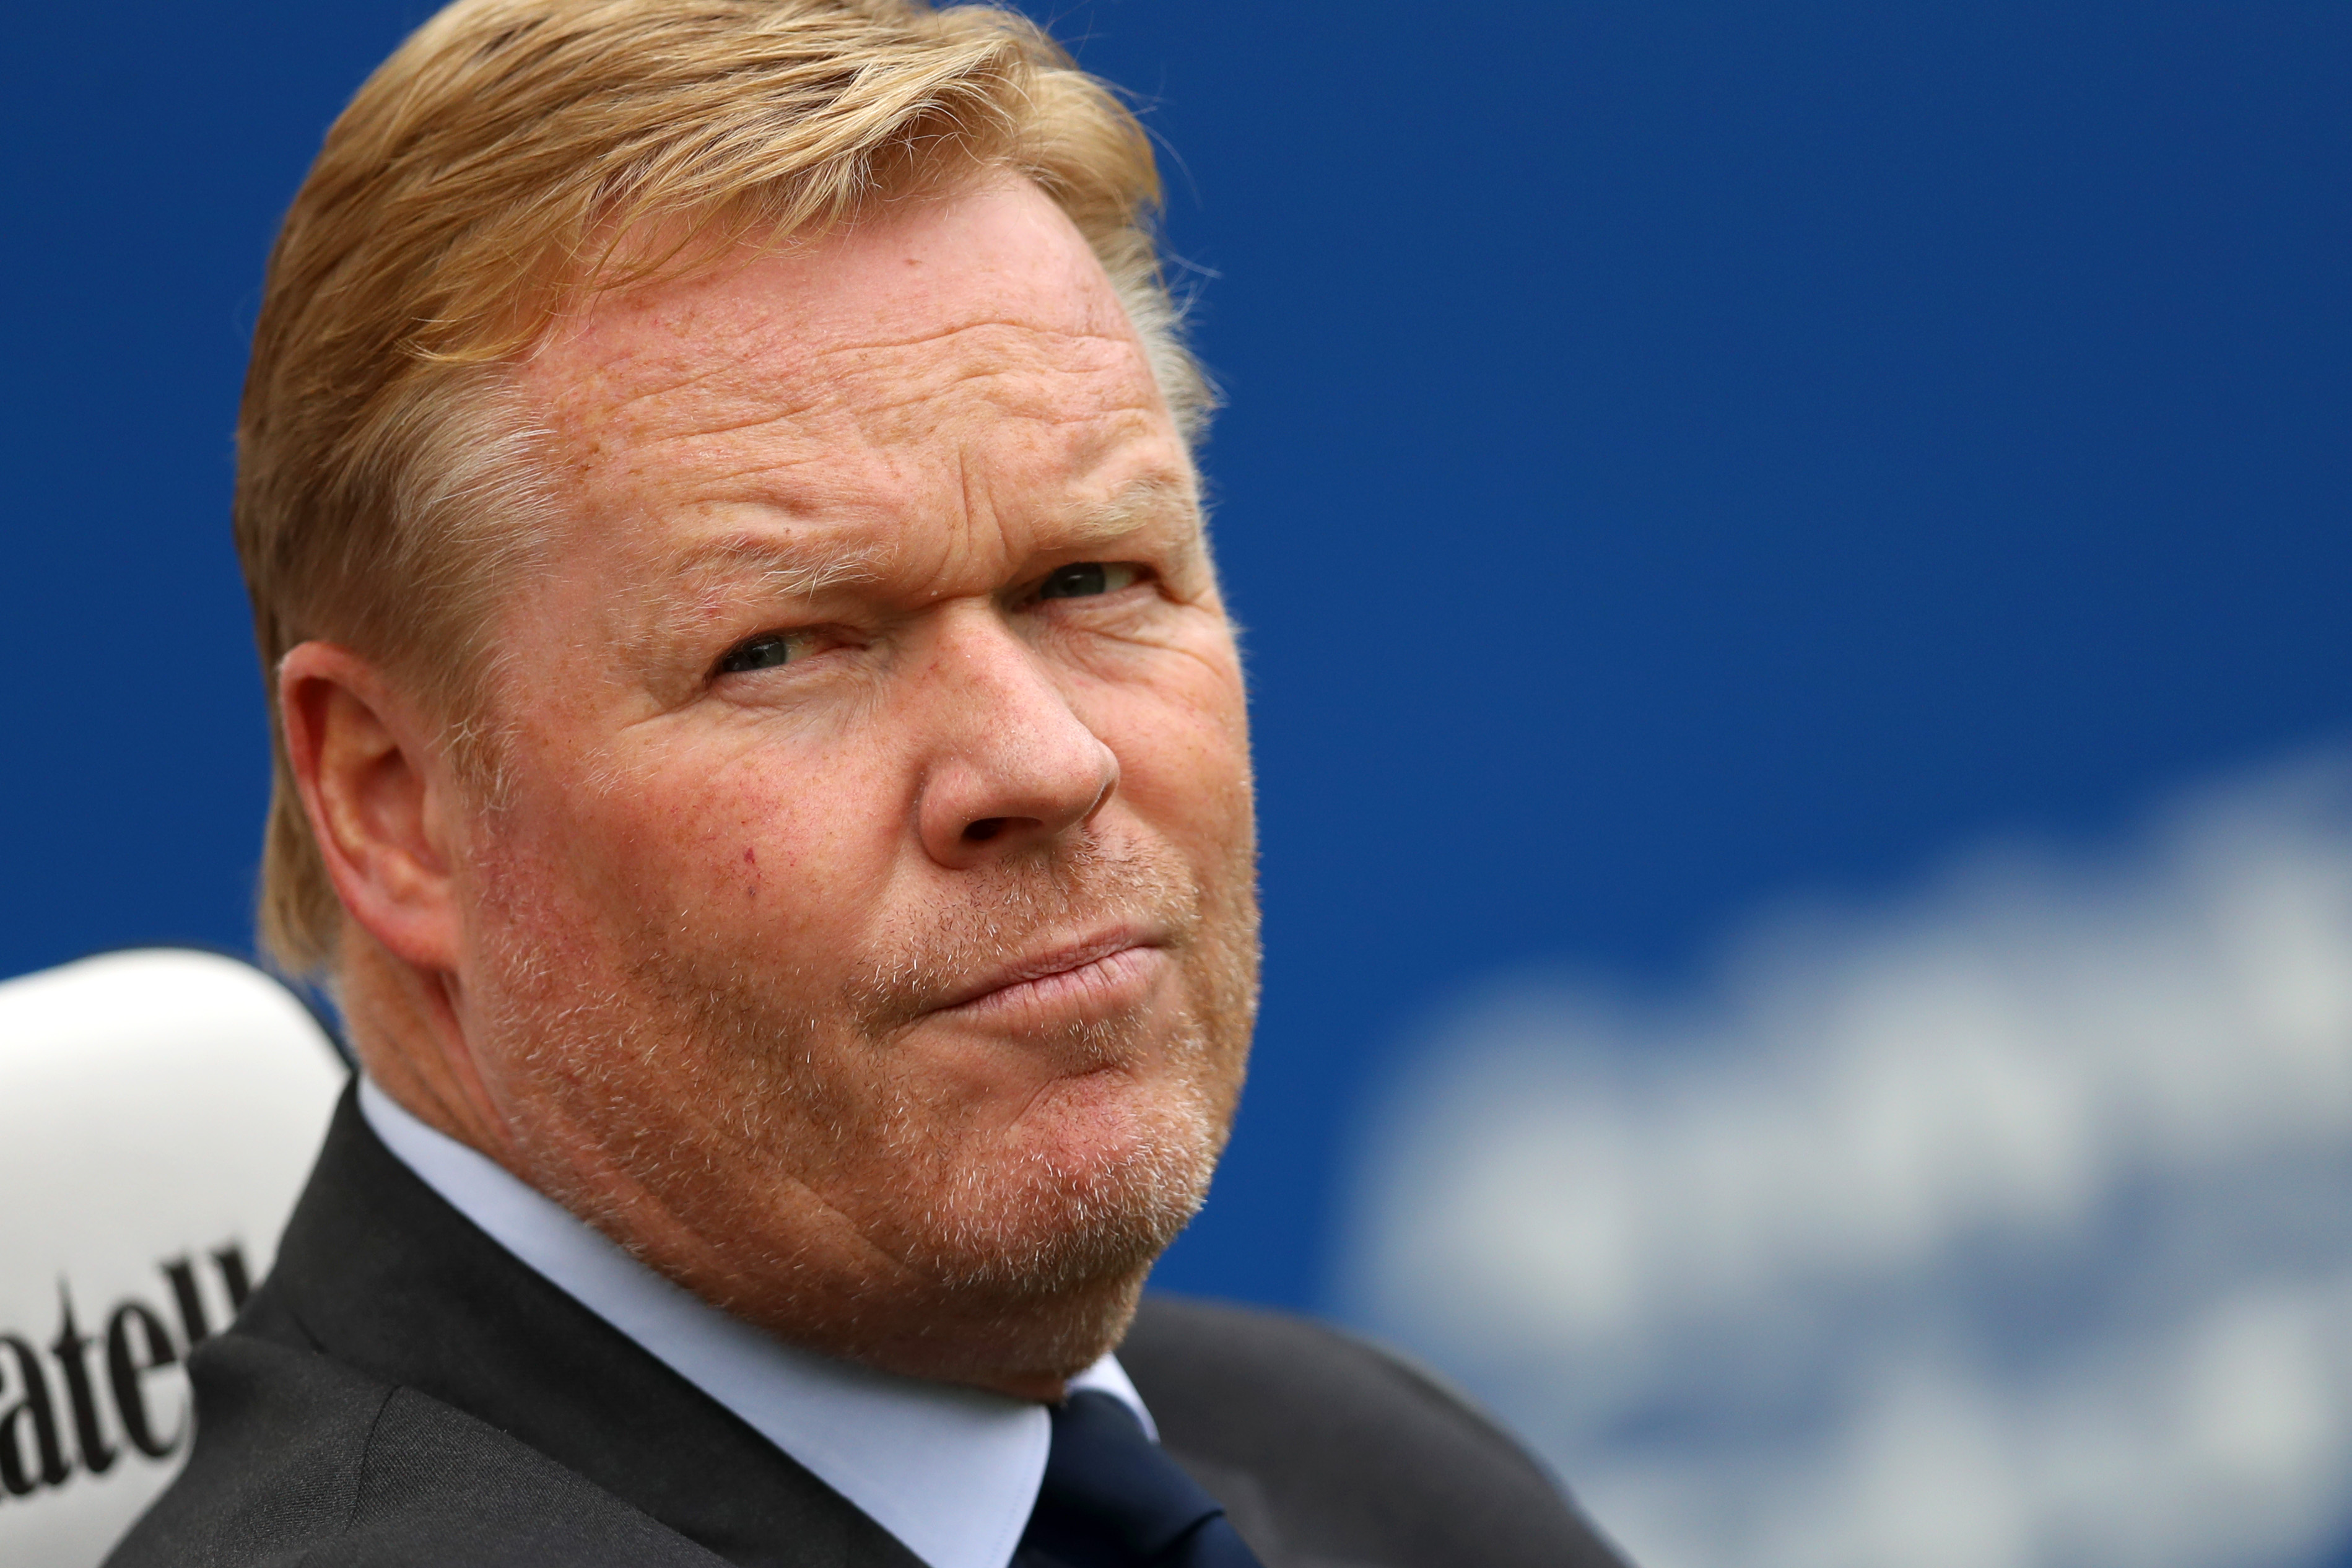 Ronald Koeman is rating his side's chances highly. (Photo by Dan Istitene/Getty Images)